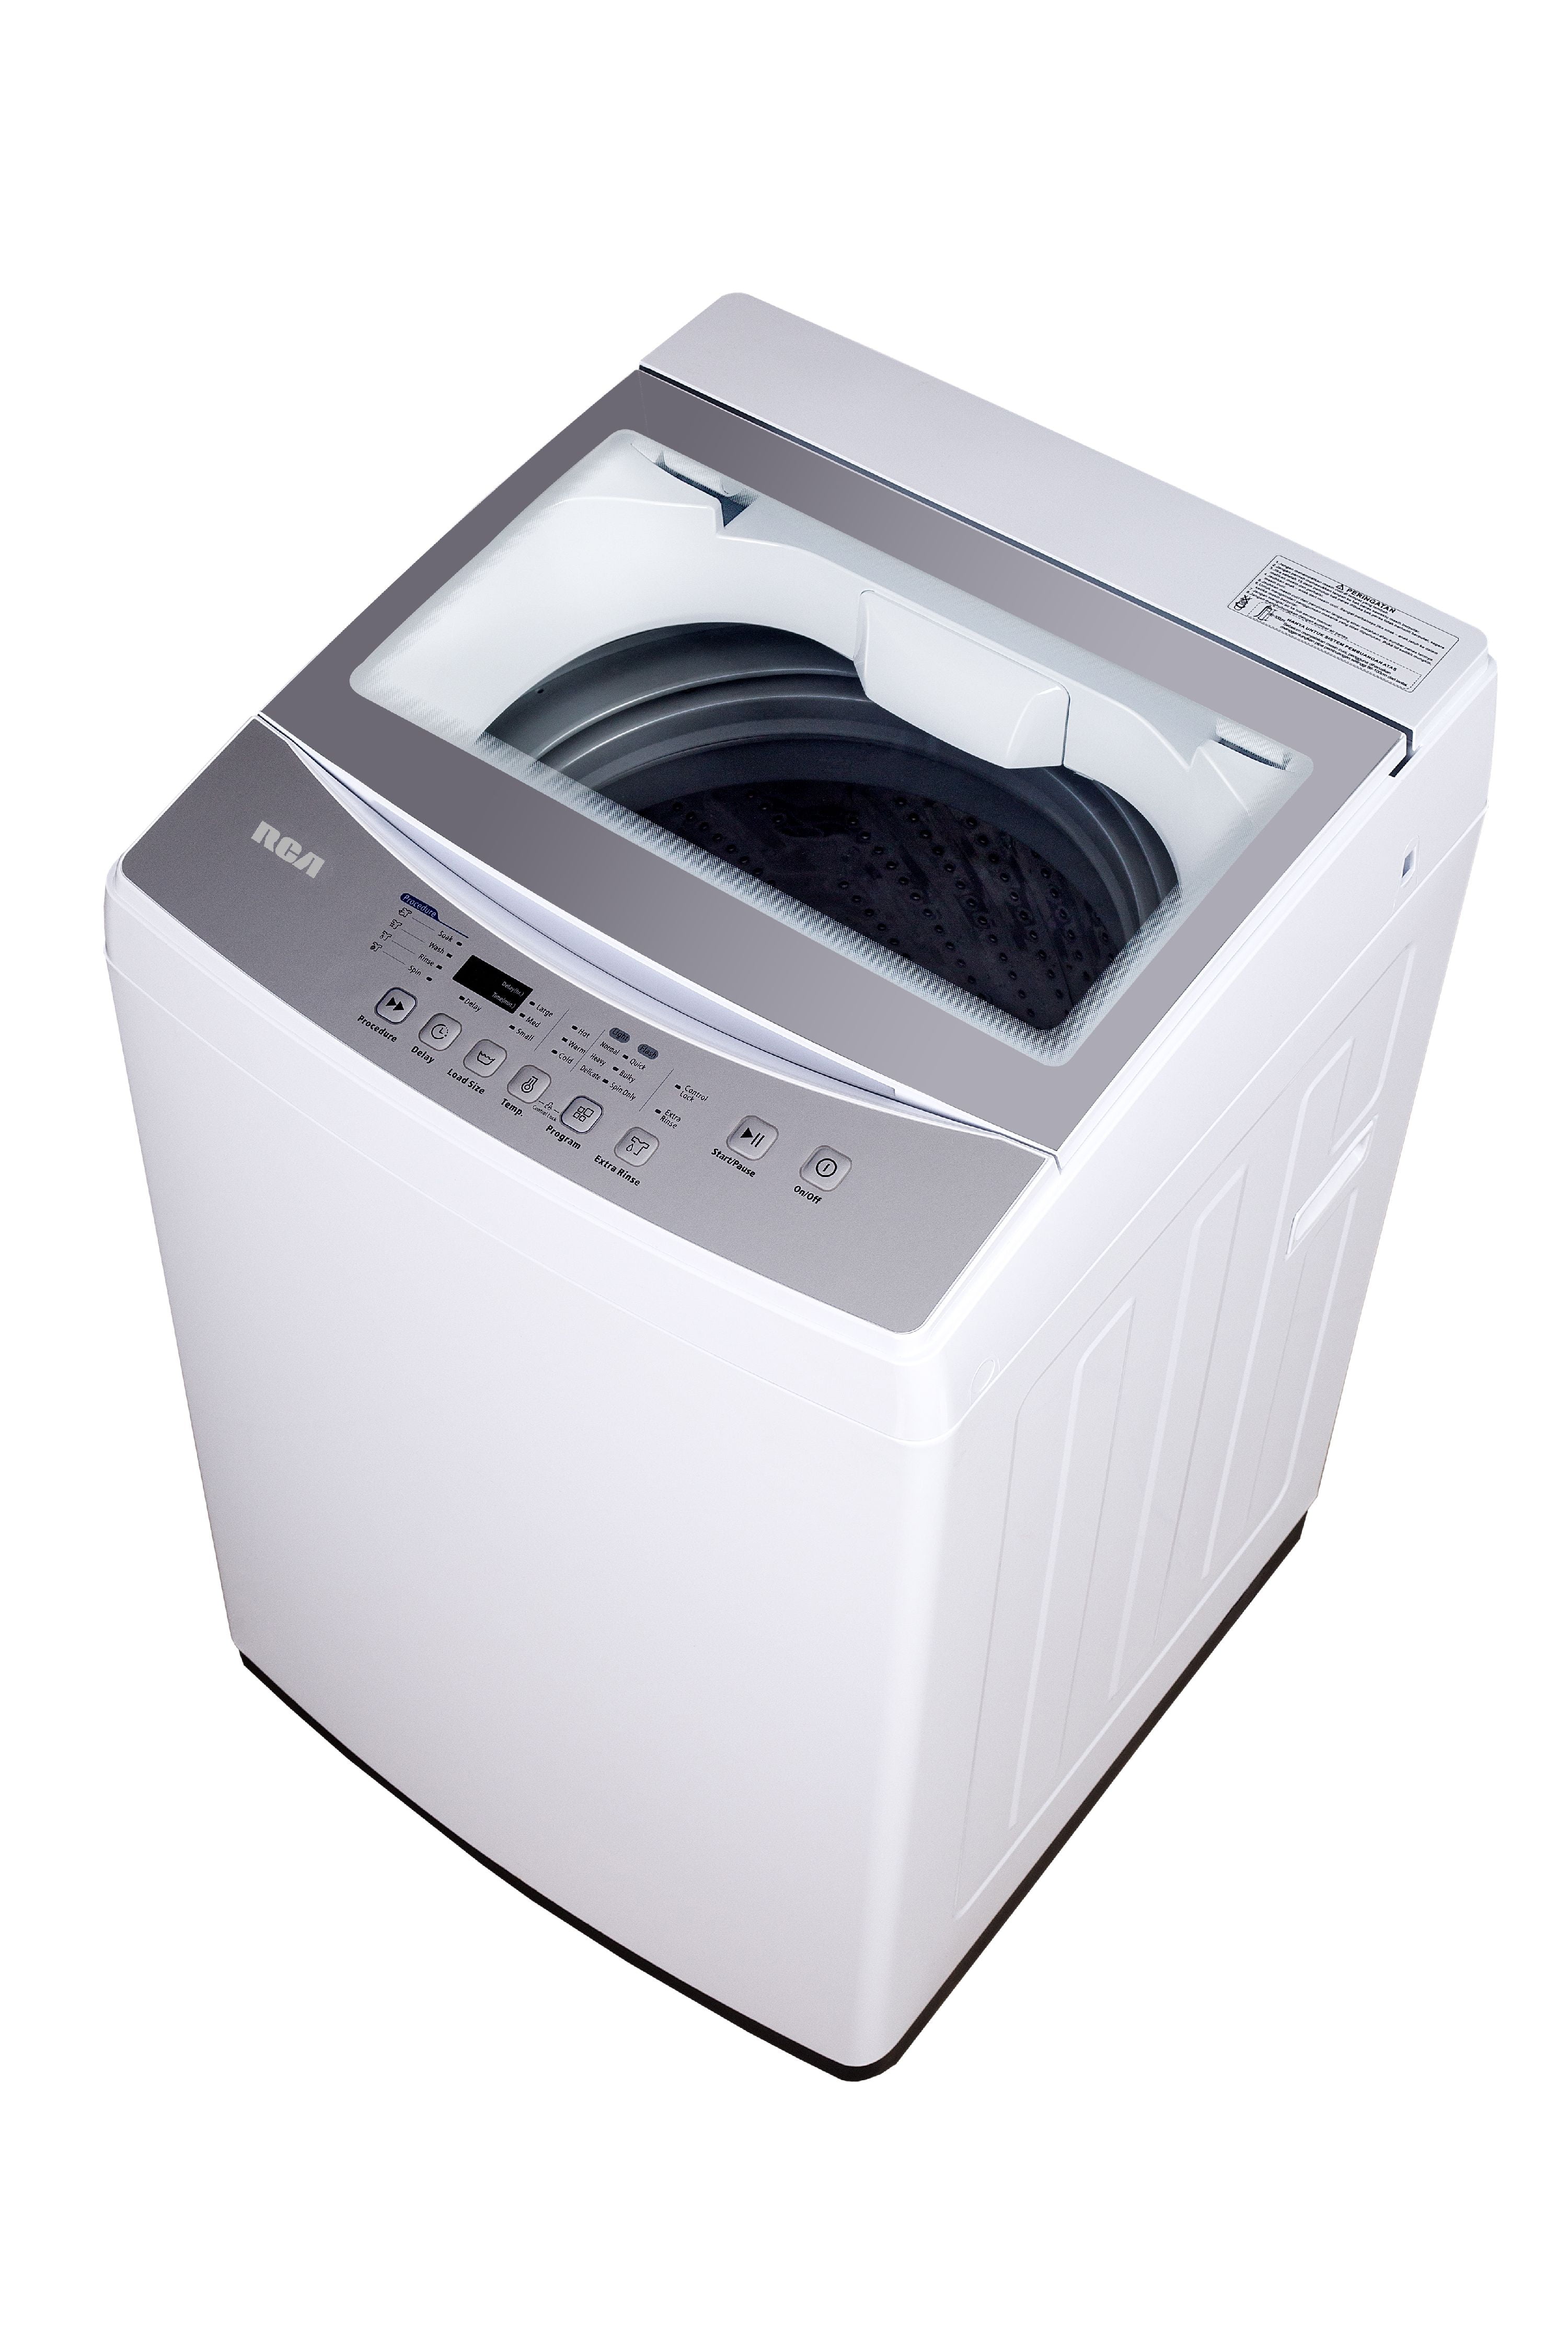 RCA 2.0 Cu. Ft. Portable Washer RPW210 